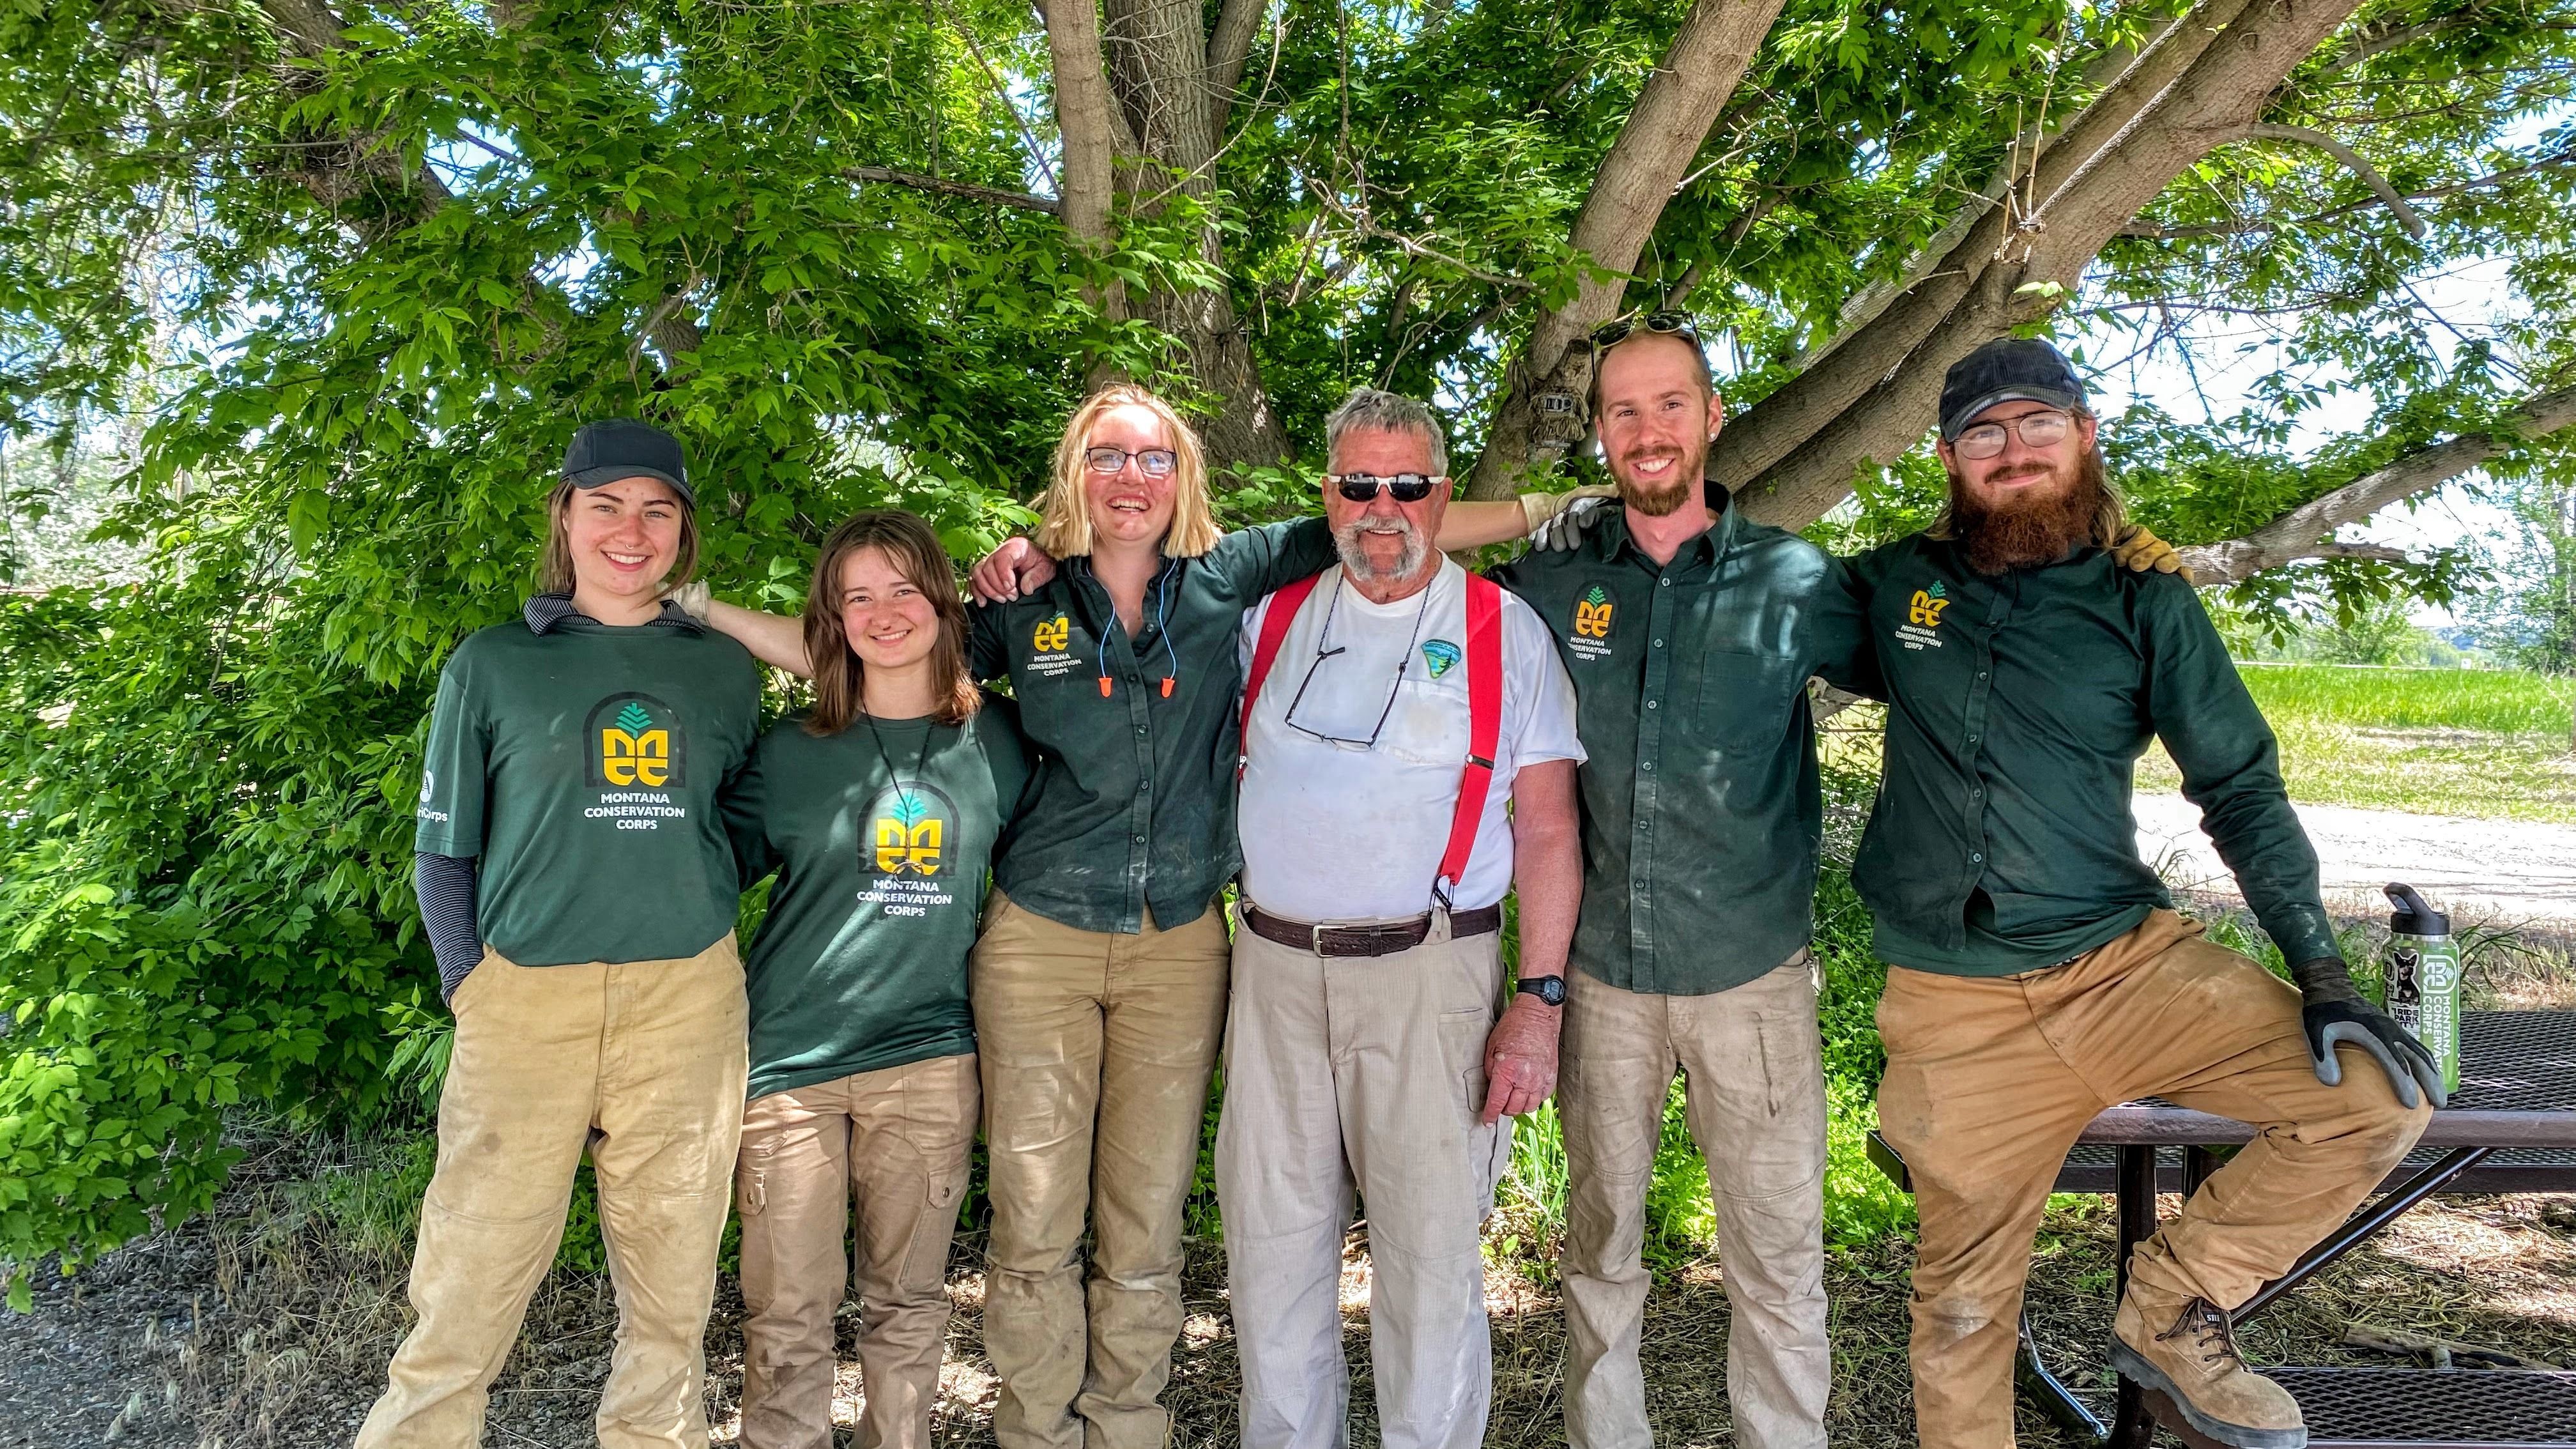 A group stands in front of a tree. In the center is an older man wearing a white shirt and red suspenders, this is Don the BLM Billings project partner.